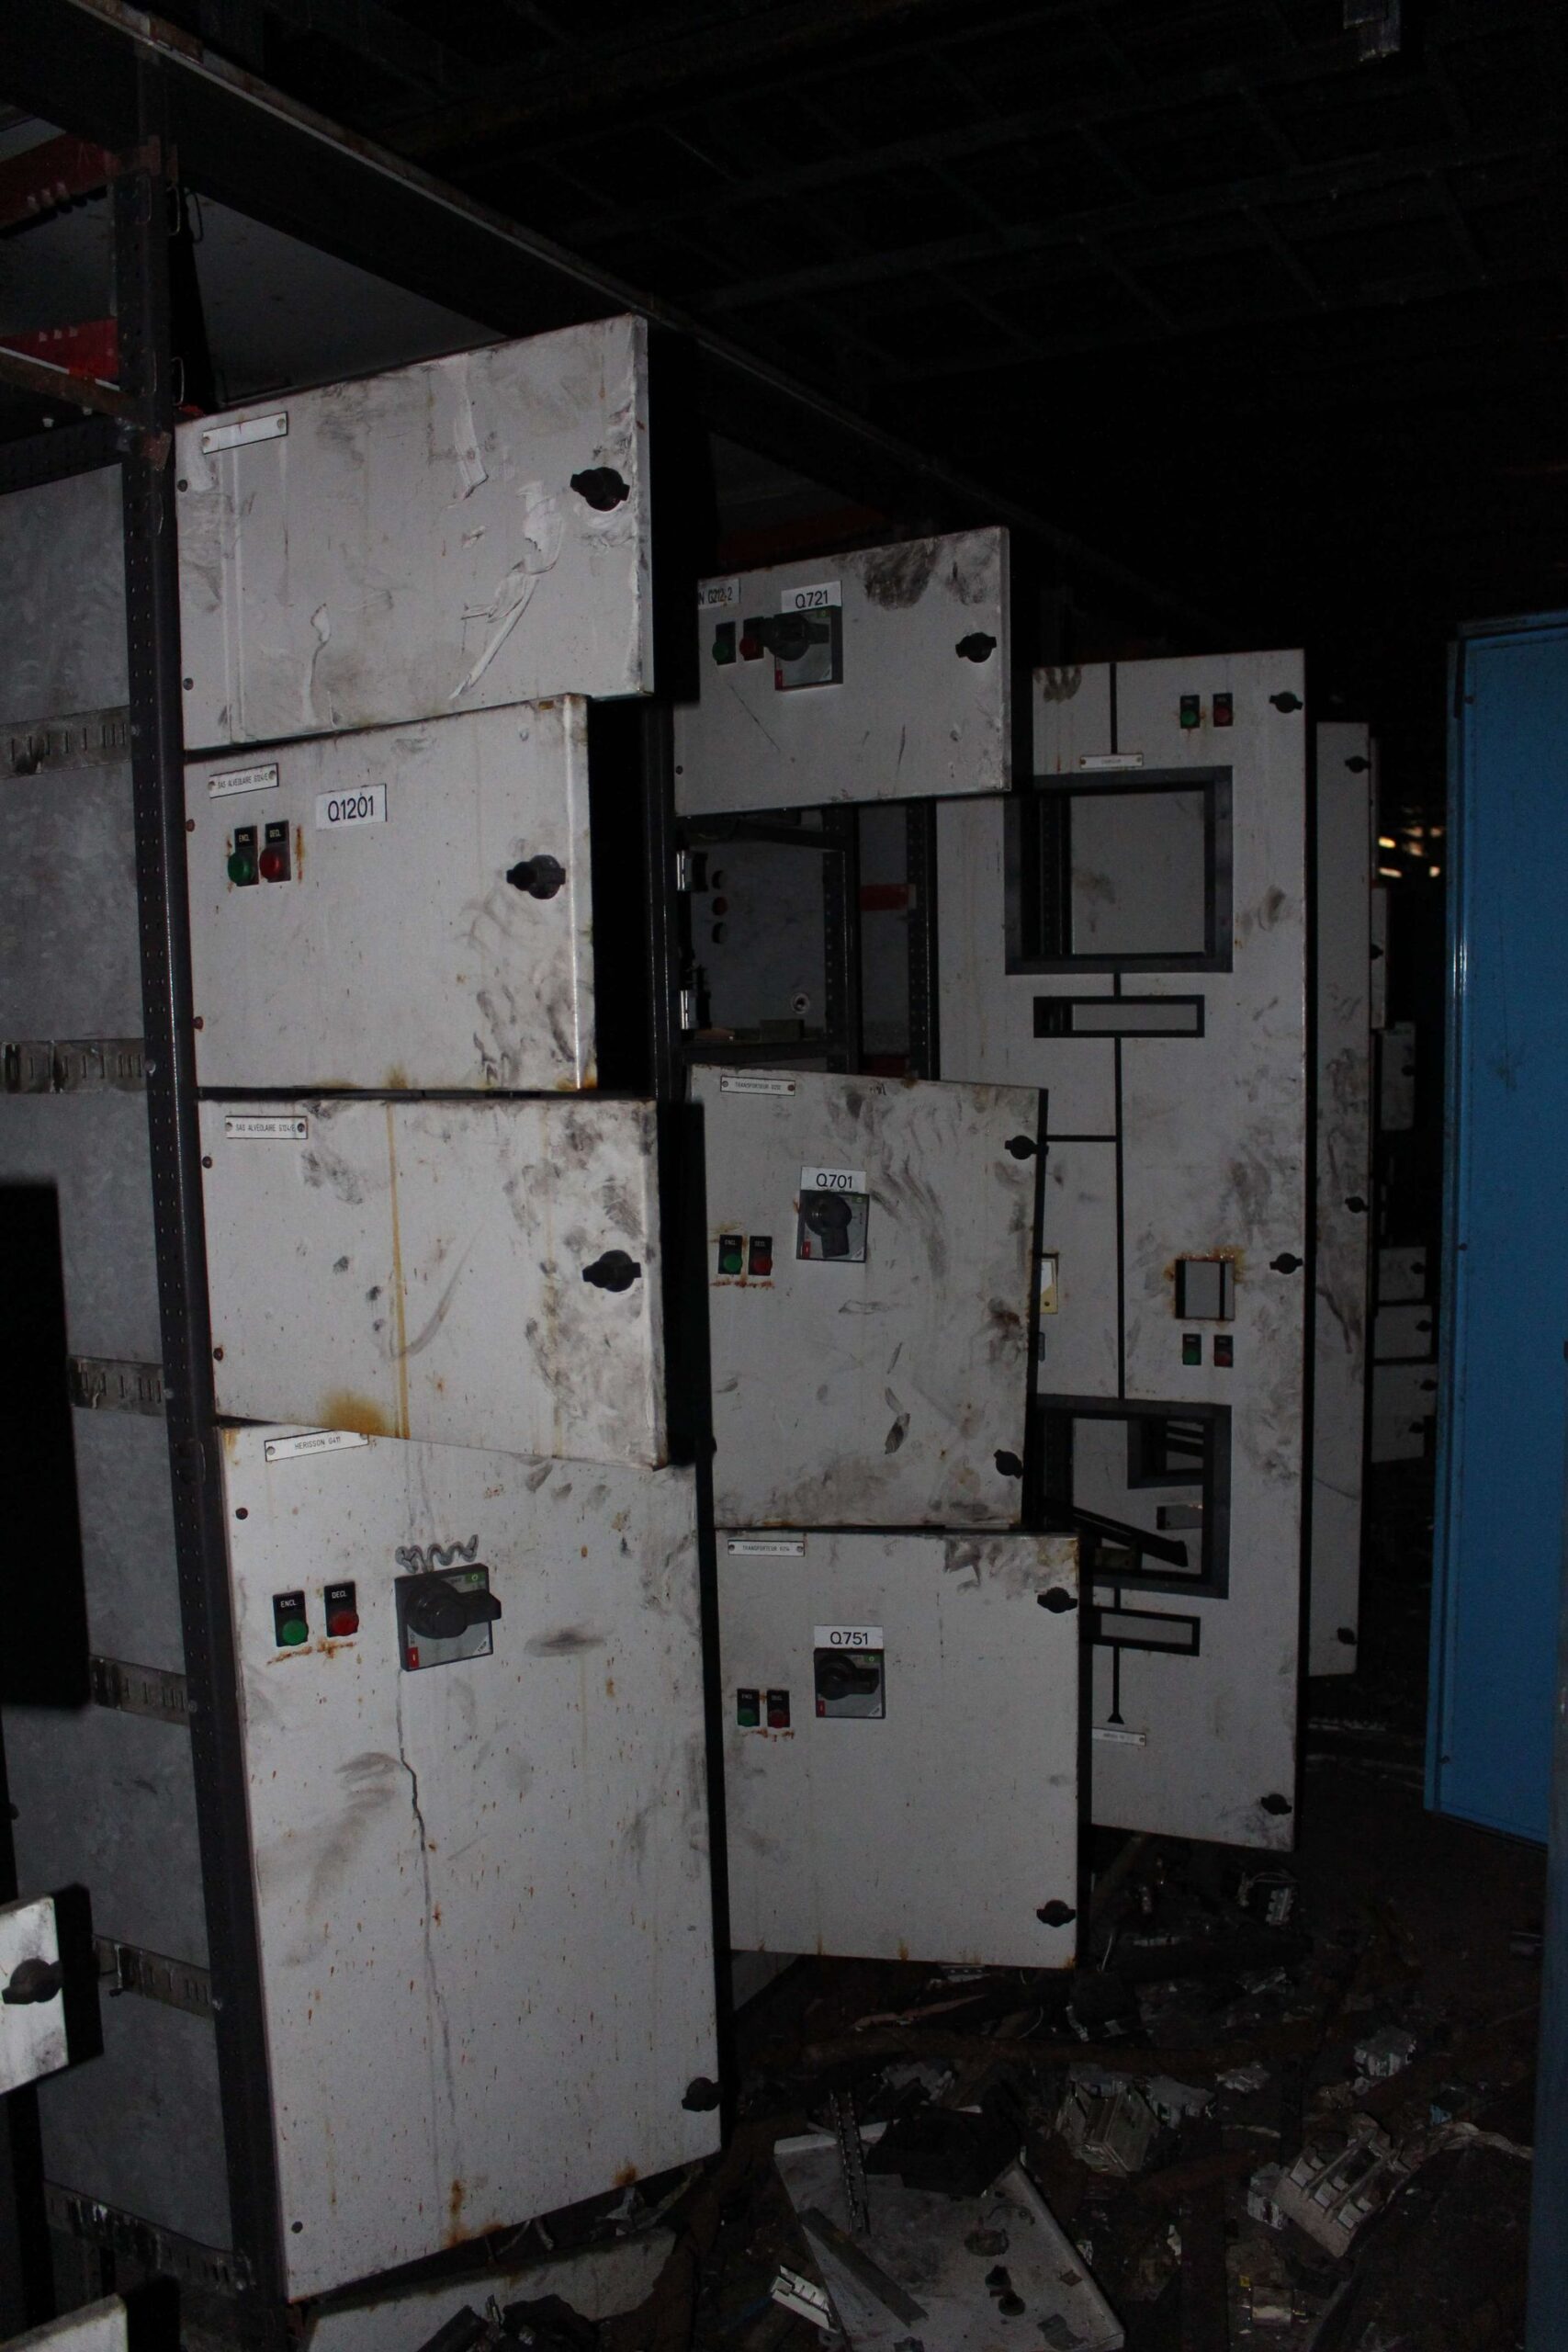 a photograph of the electrical network in a former steel factory, the photo shows many fuse boxes and buttons